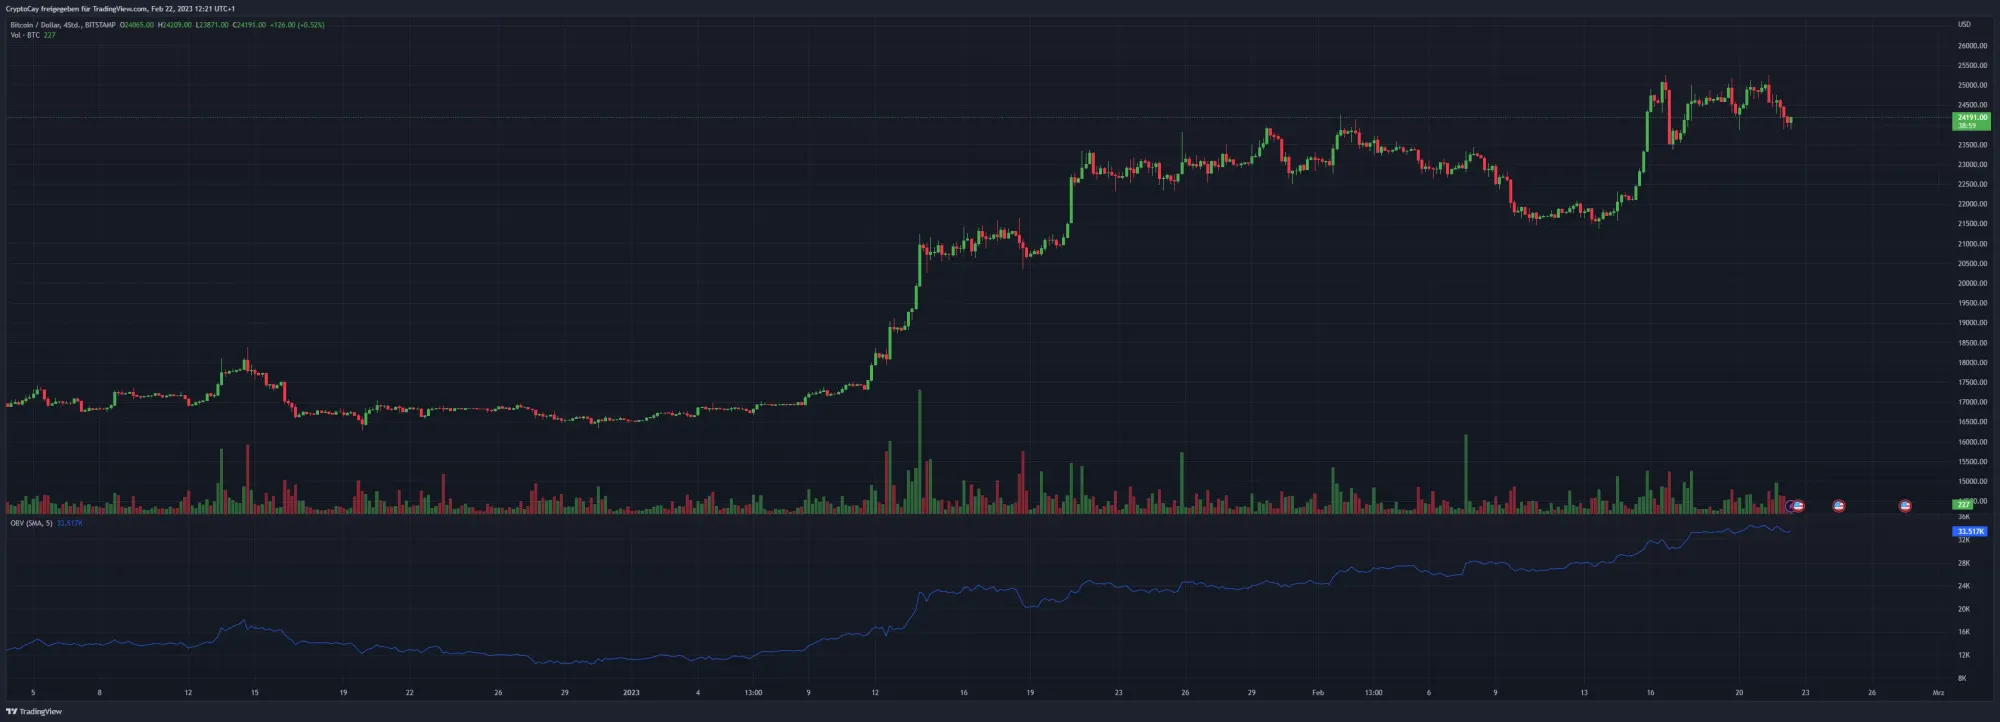 OBV im Bitcoin-Chart, Quelle: Trading View